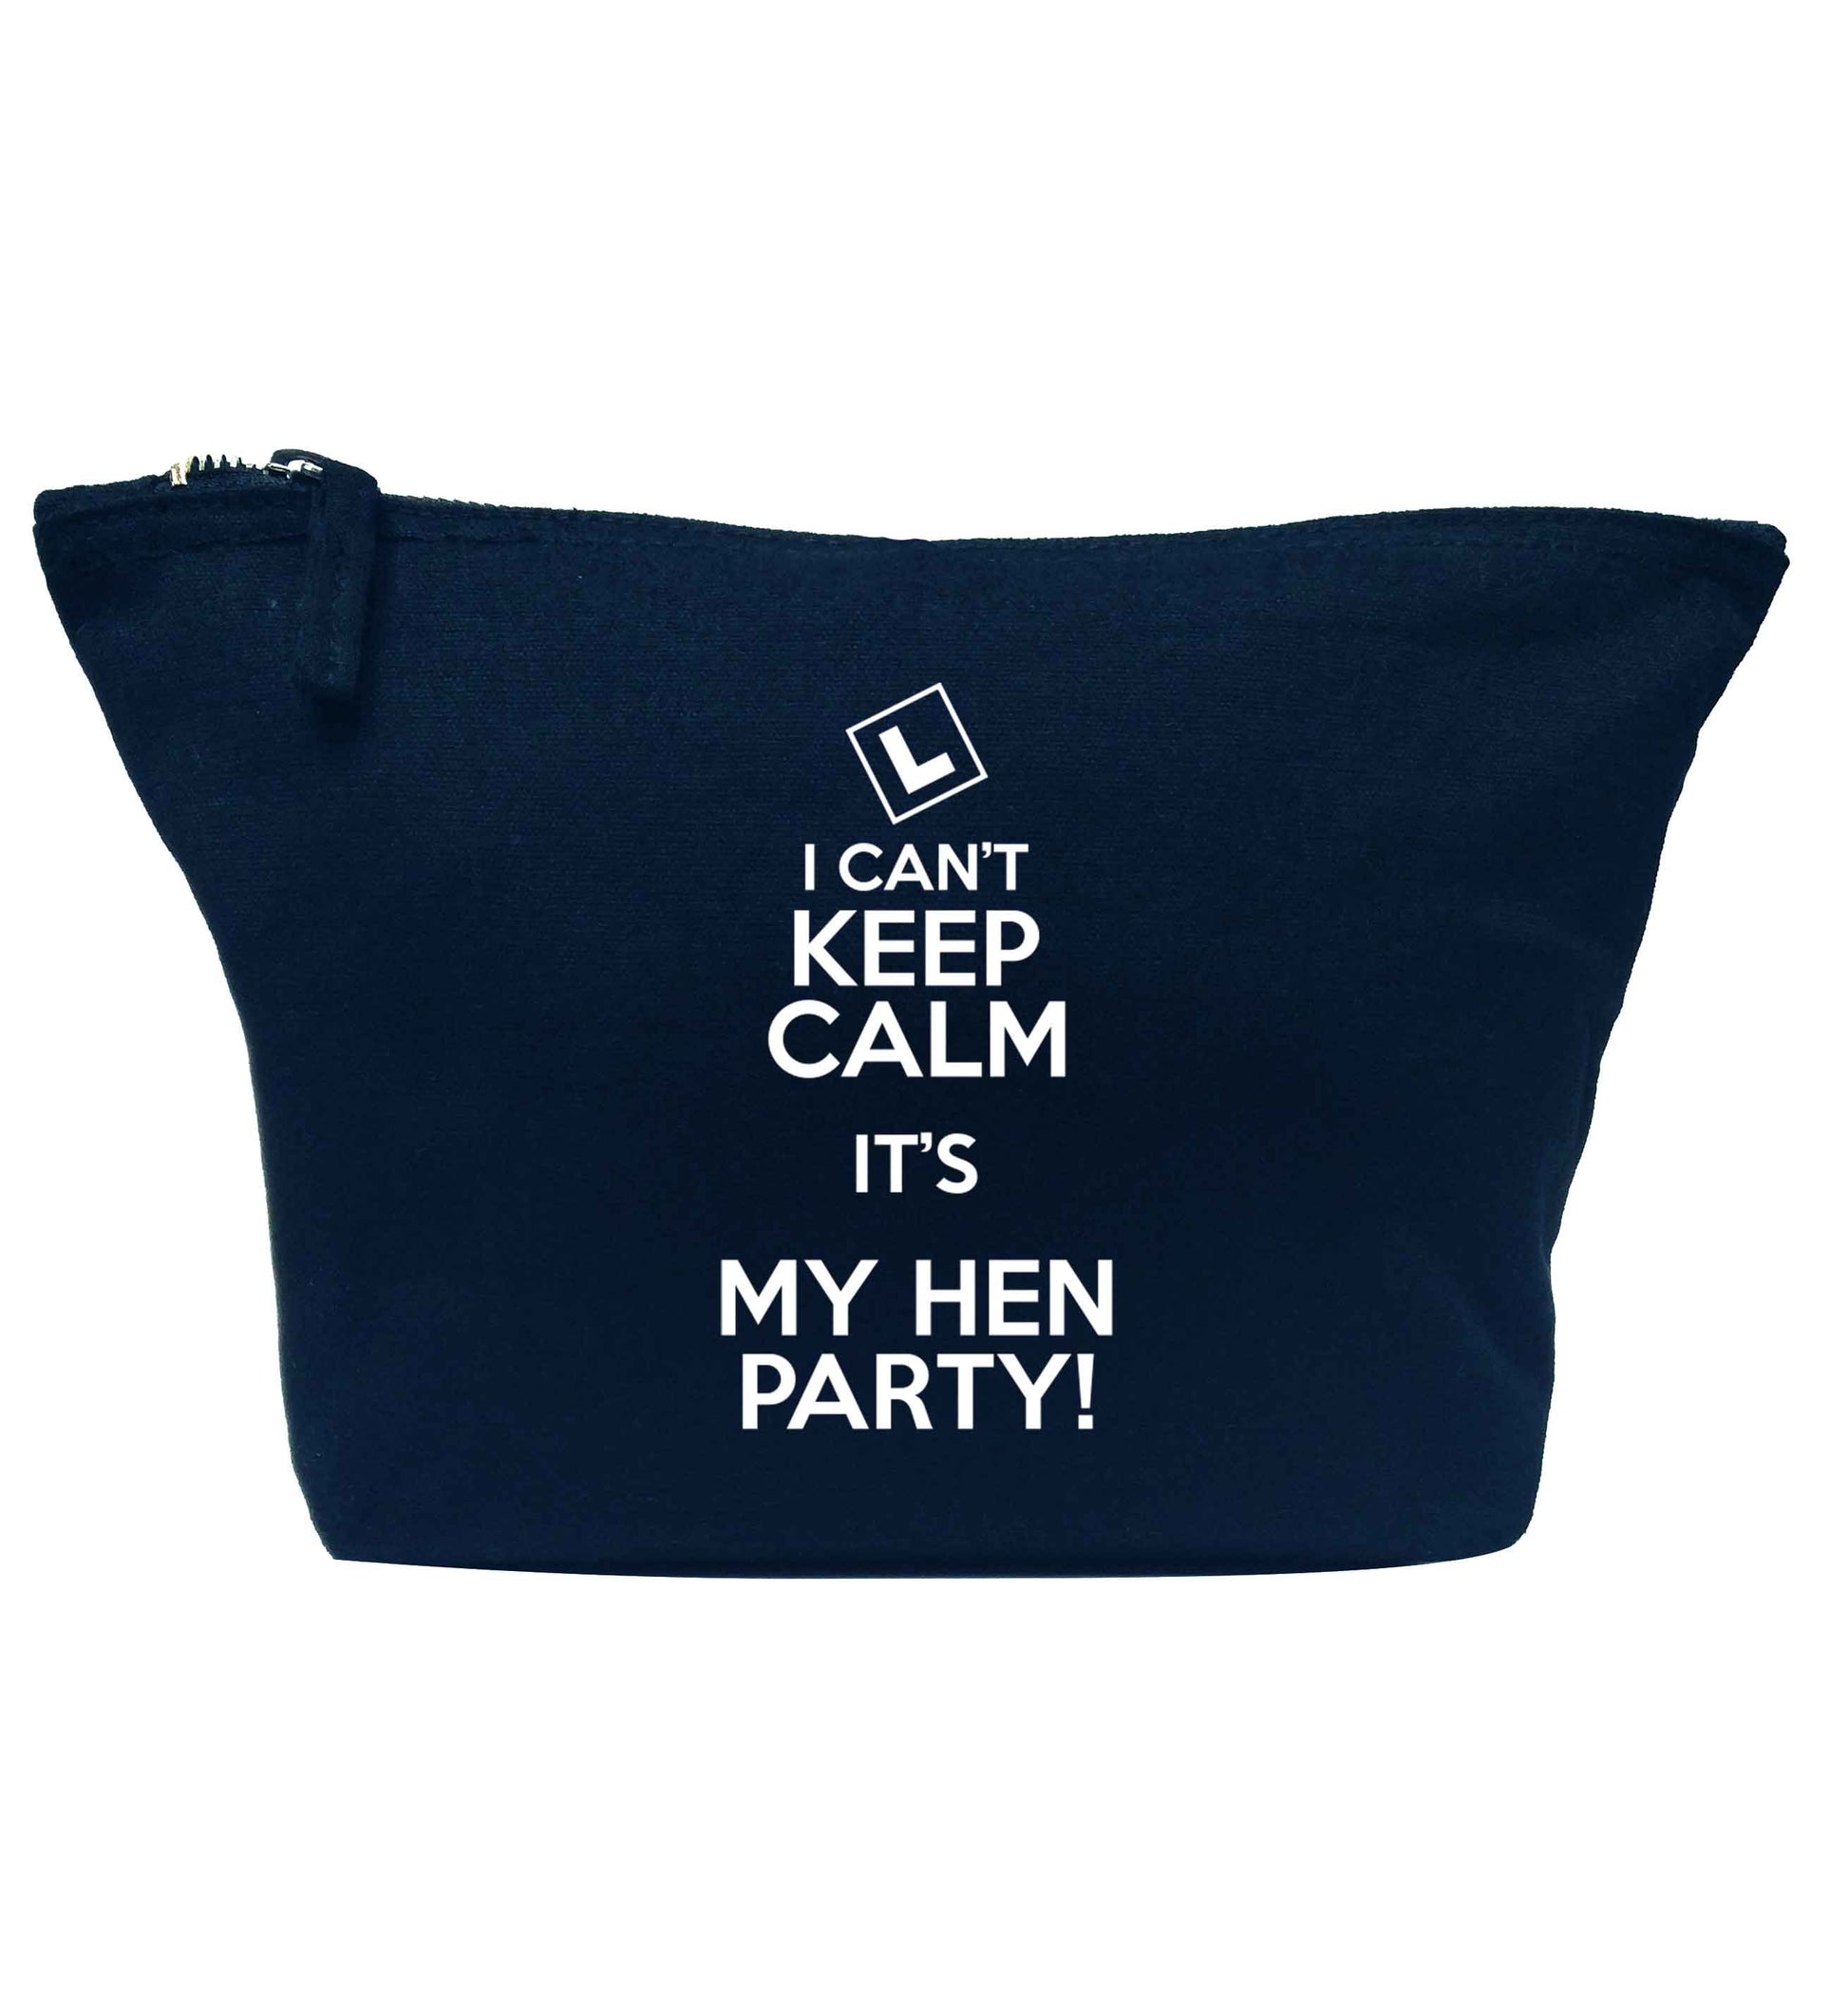 I can't keep calm it's my hen party navy makeup bag